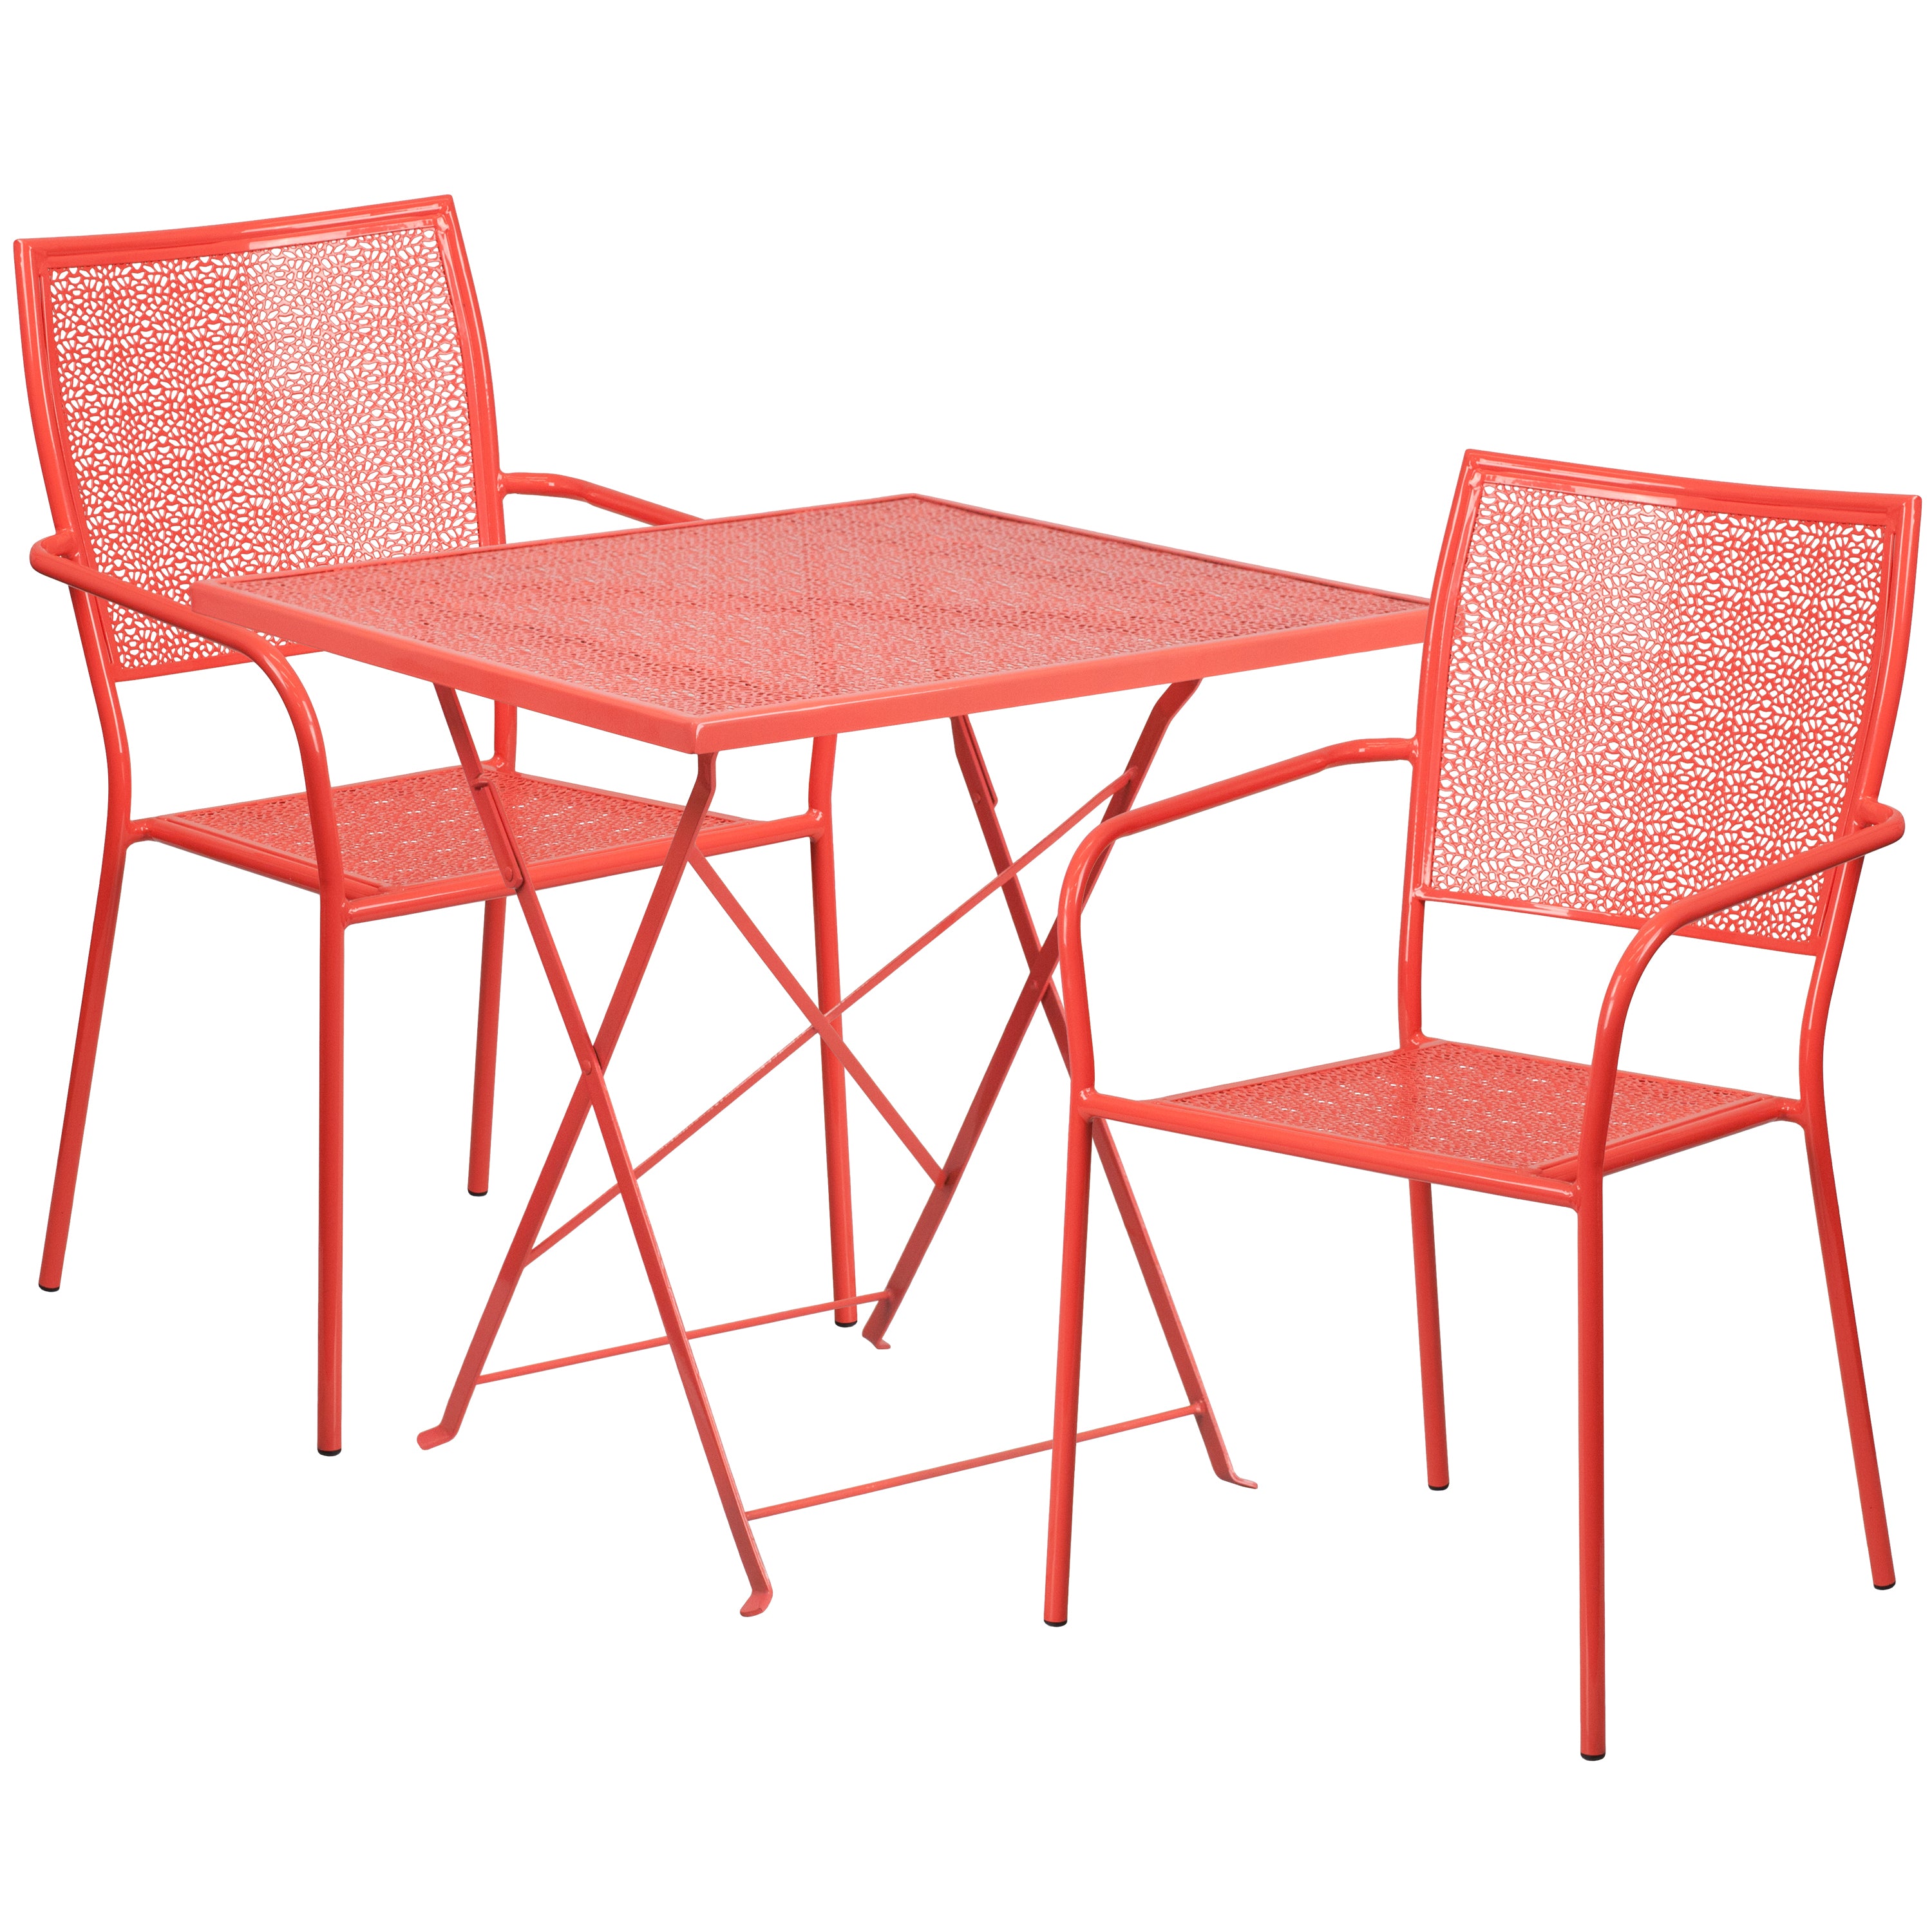 Oia Commercial Grade 28" Square Indoor-Outdoor Steel Folding Patio Table Set with 2 Square Back Chairs-Indoor/Outdoor Dining Sets-Flash Furniture-Wall2Wall Furnishings